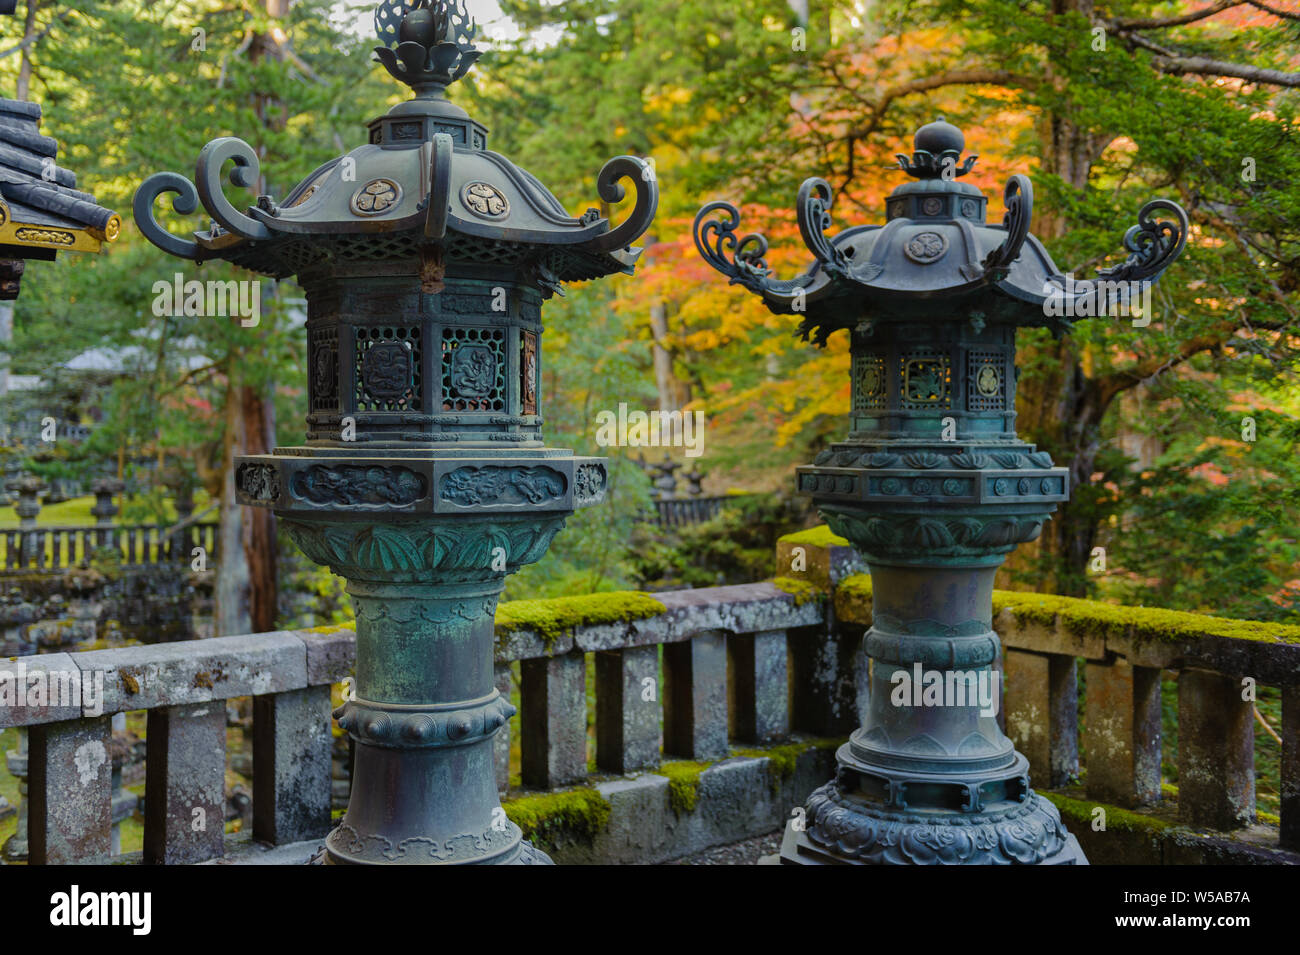 Traditional bronze lanterns in Nikkos Tosho-gu temple with wonderful rich details of classic artwork, Japan October 2018 Stock Photo